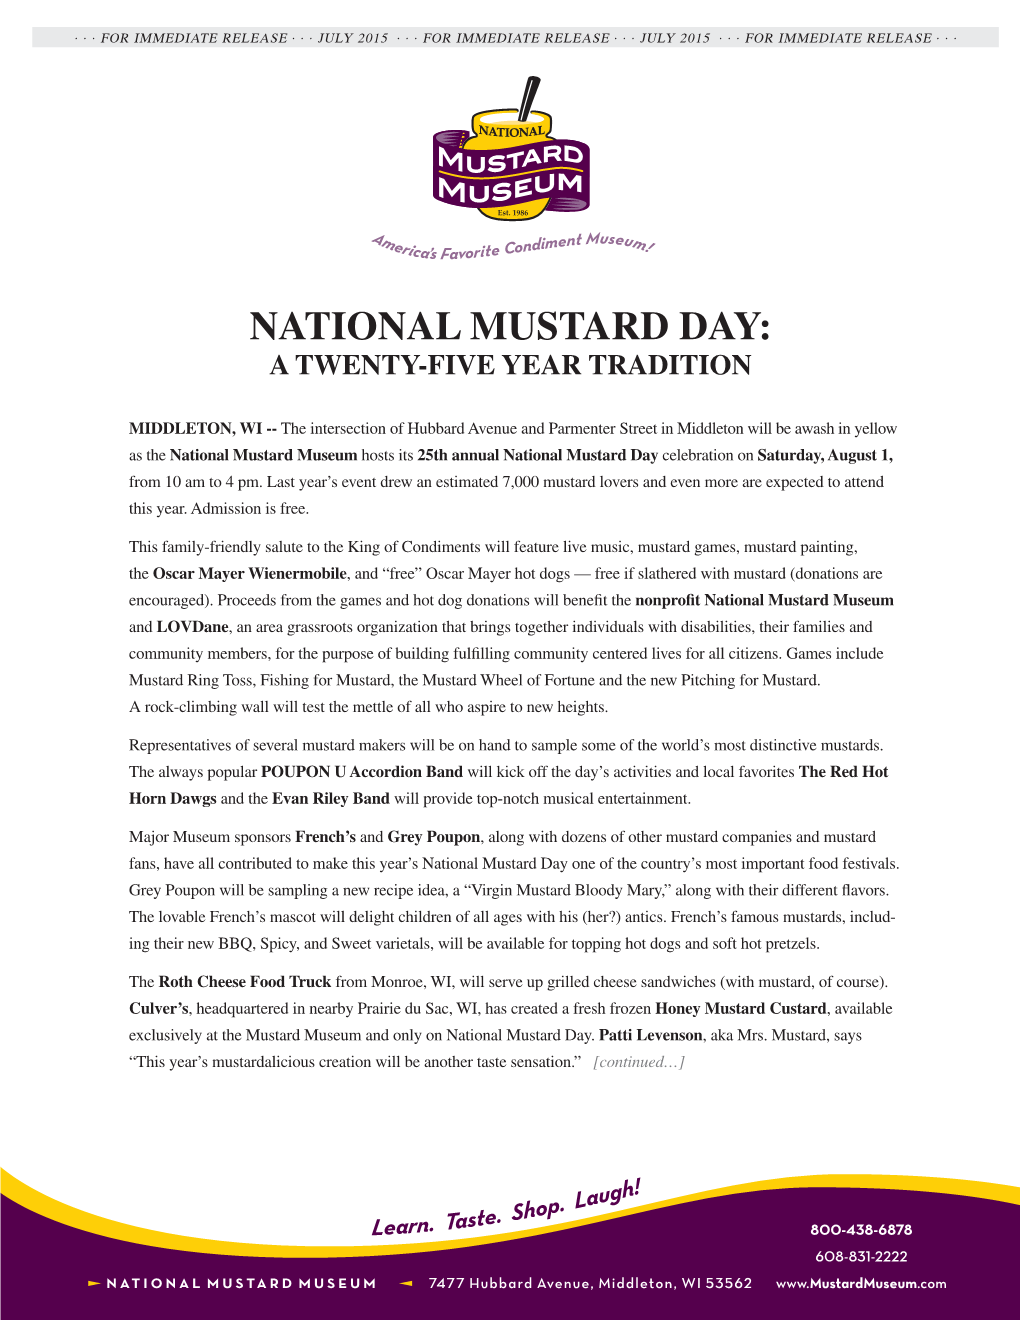 National Mustard Day: a Twenty-Five Year Tradition